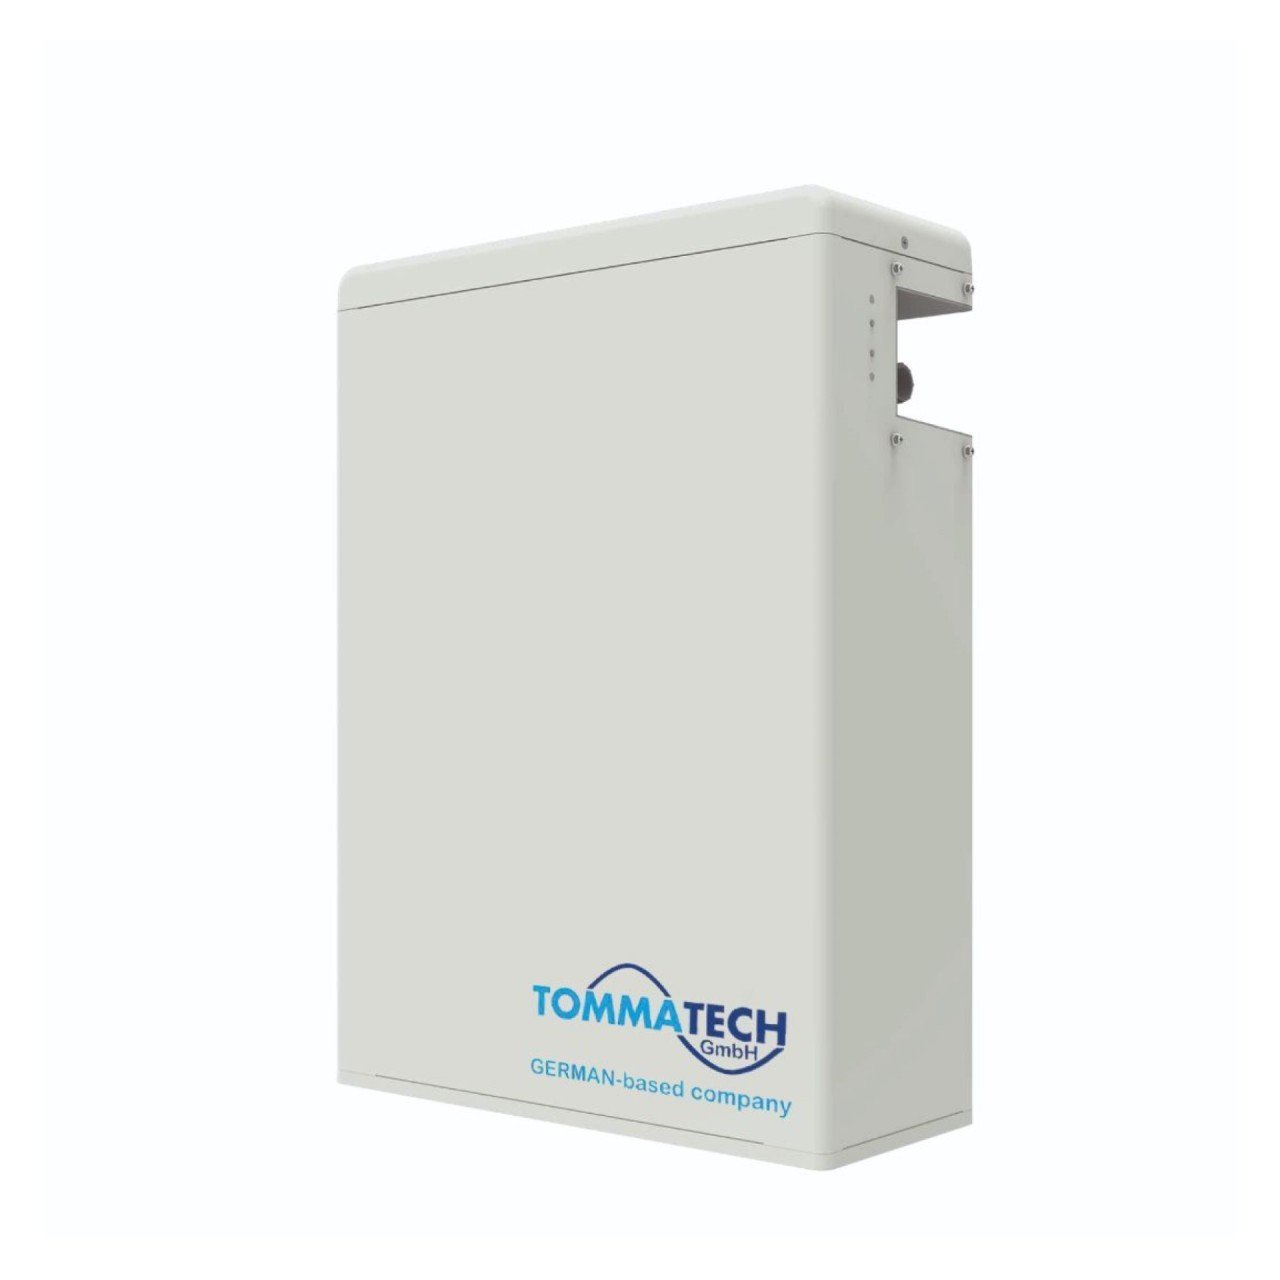 TommaTech High Tech Power General Pack 5.8 kWh Lithium-Batterie